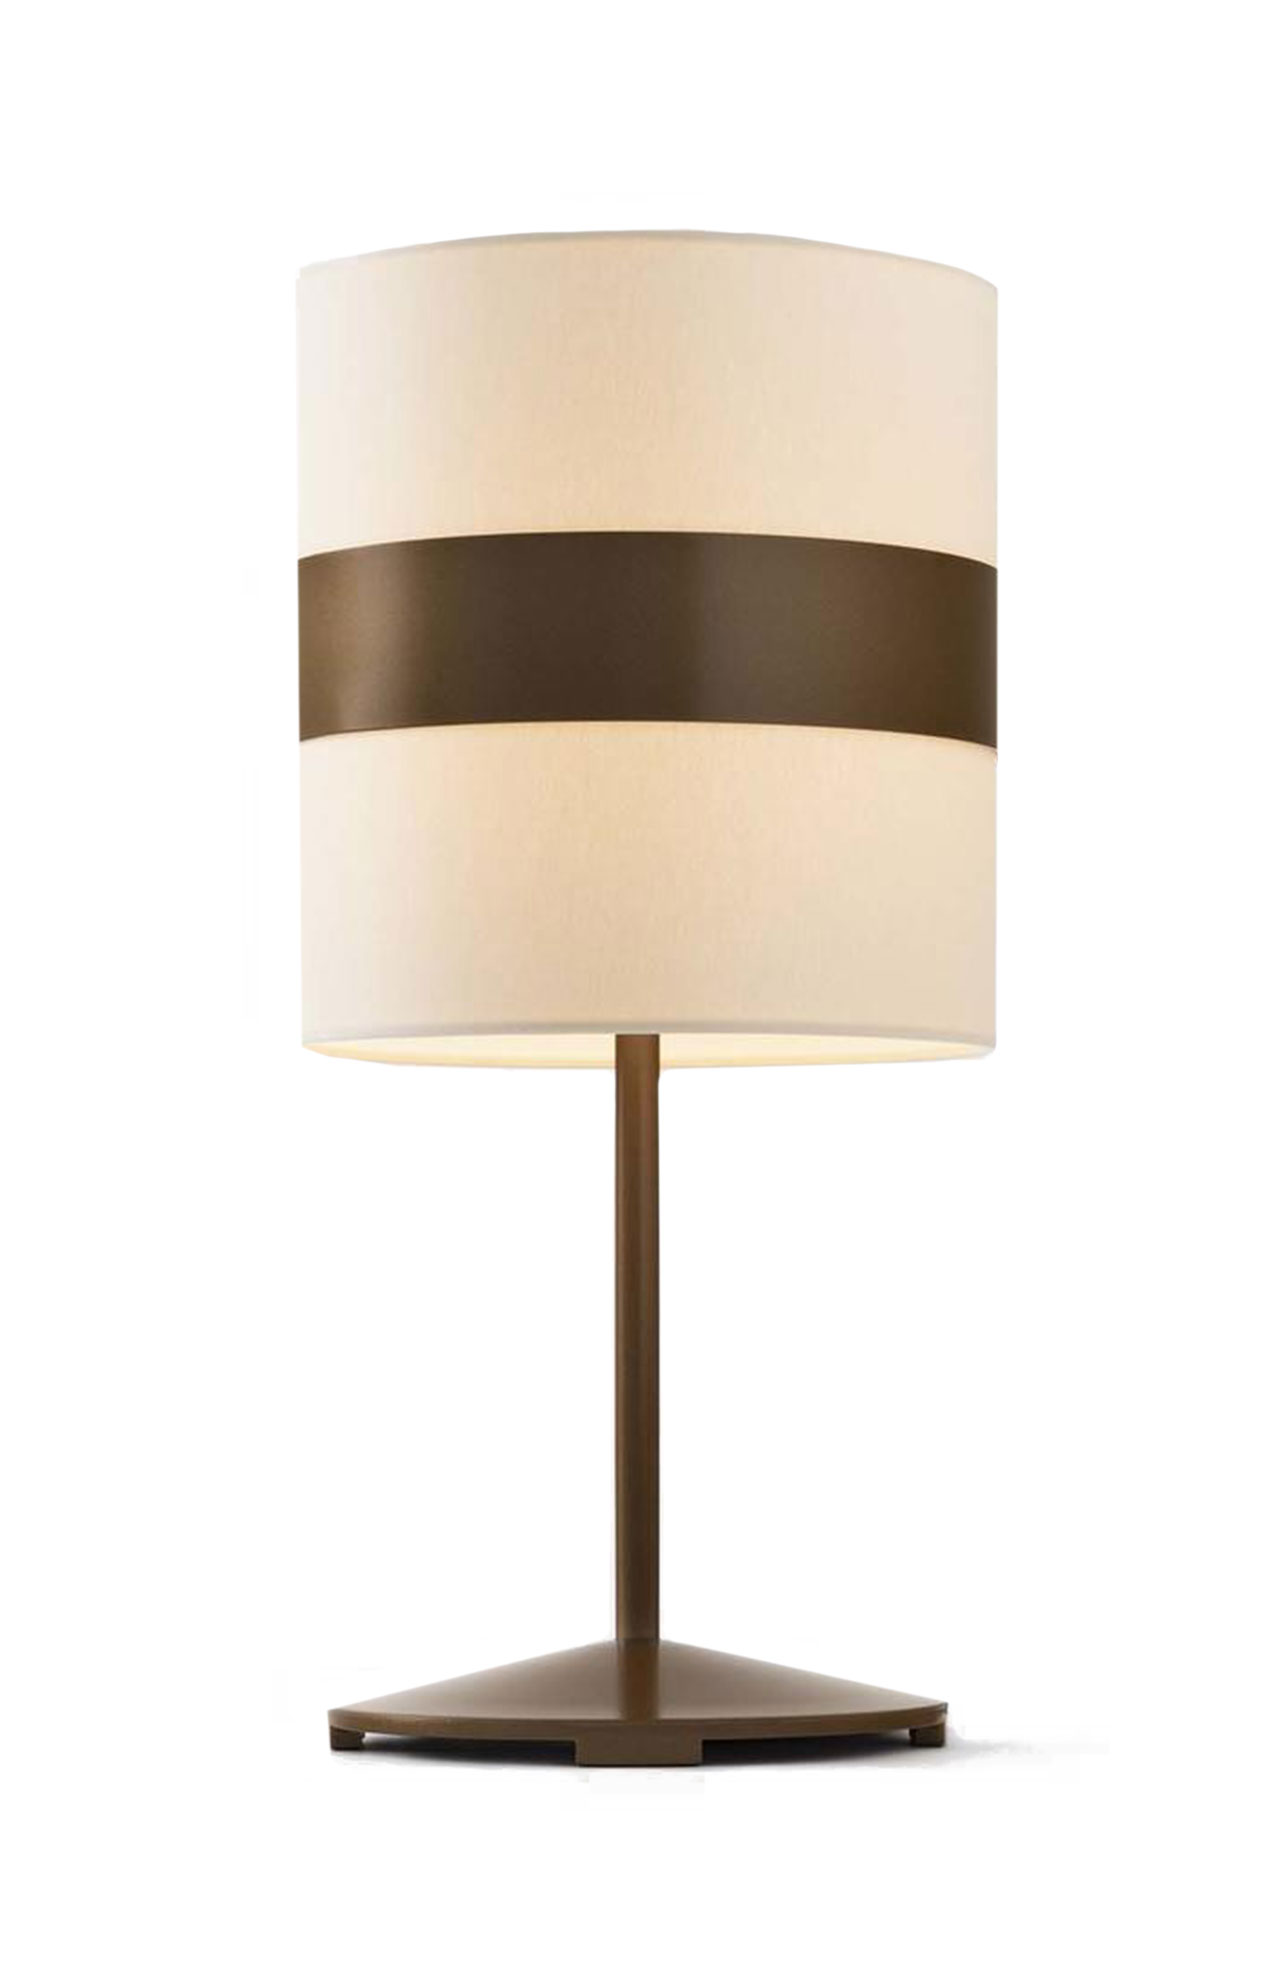 Bamba Table Lamp from Holly Hunt